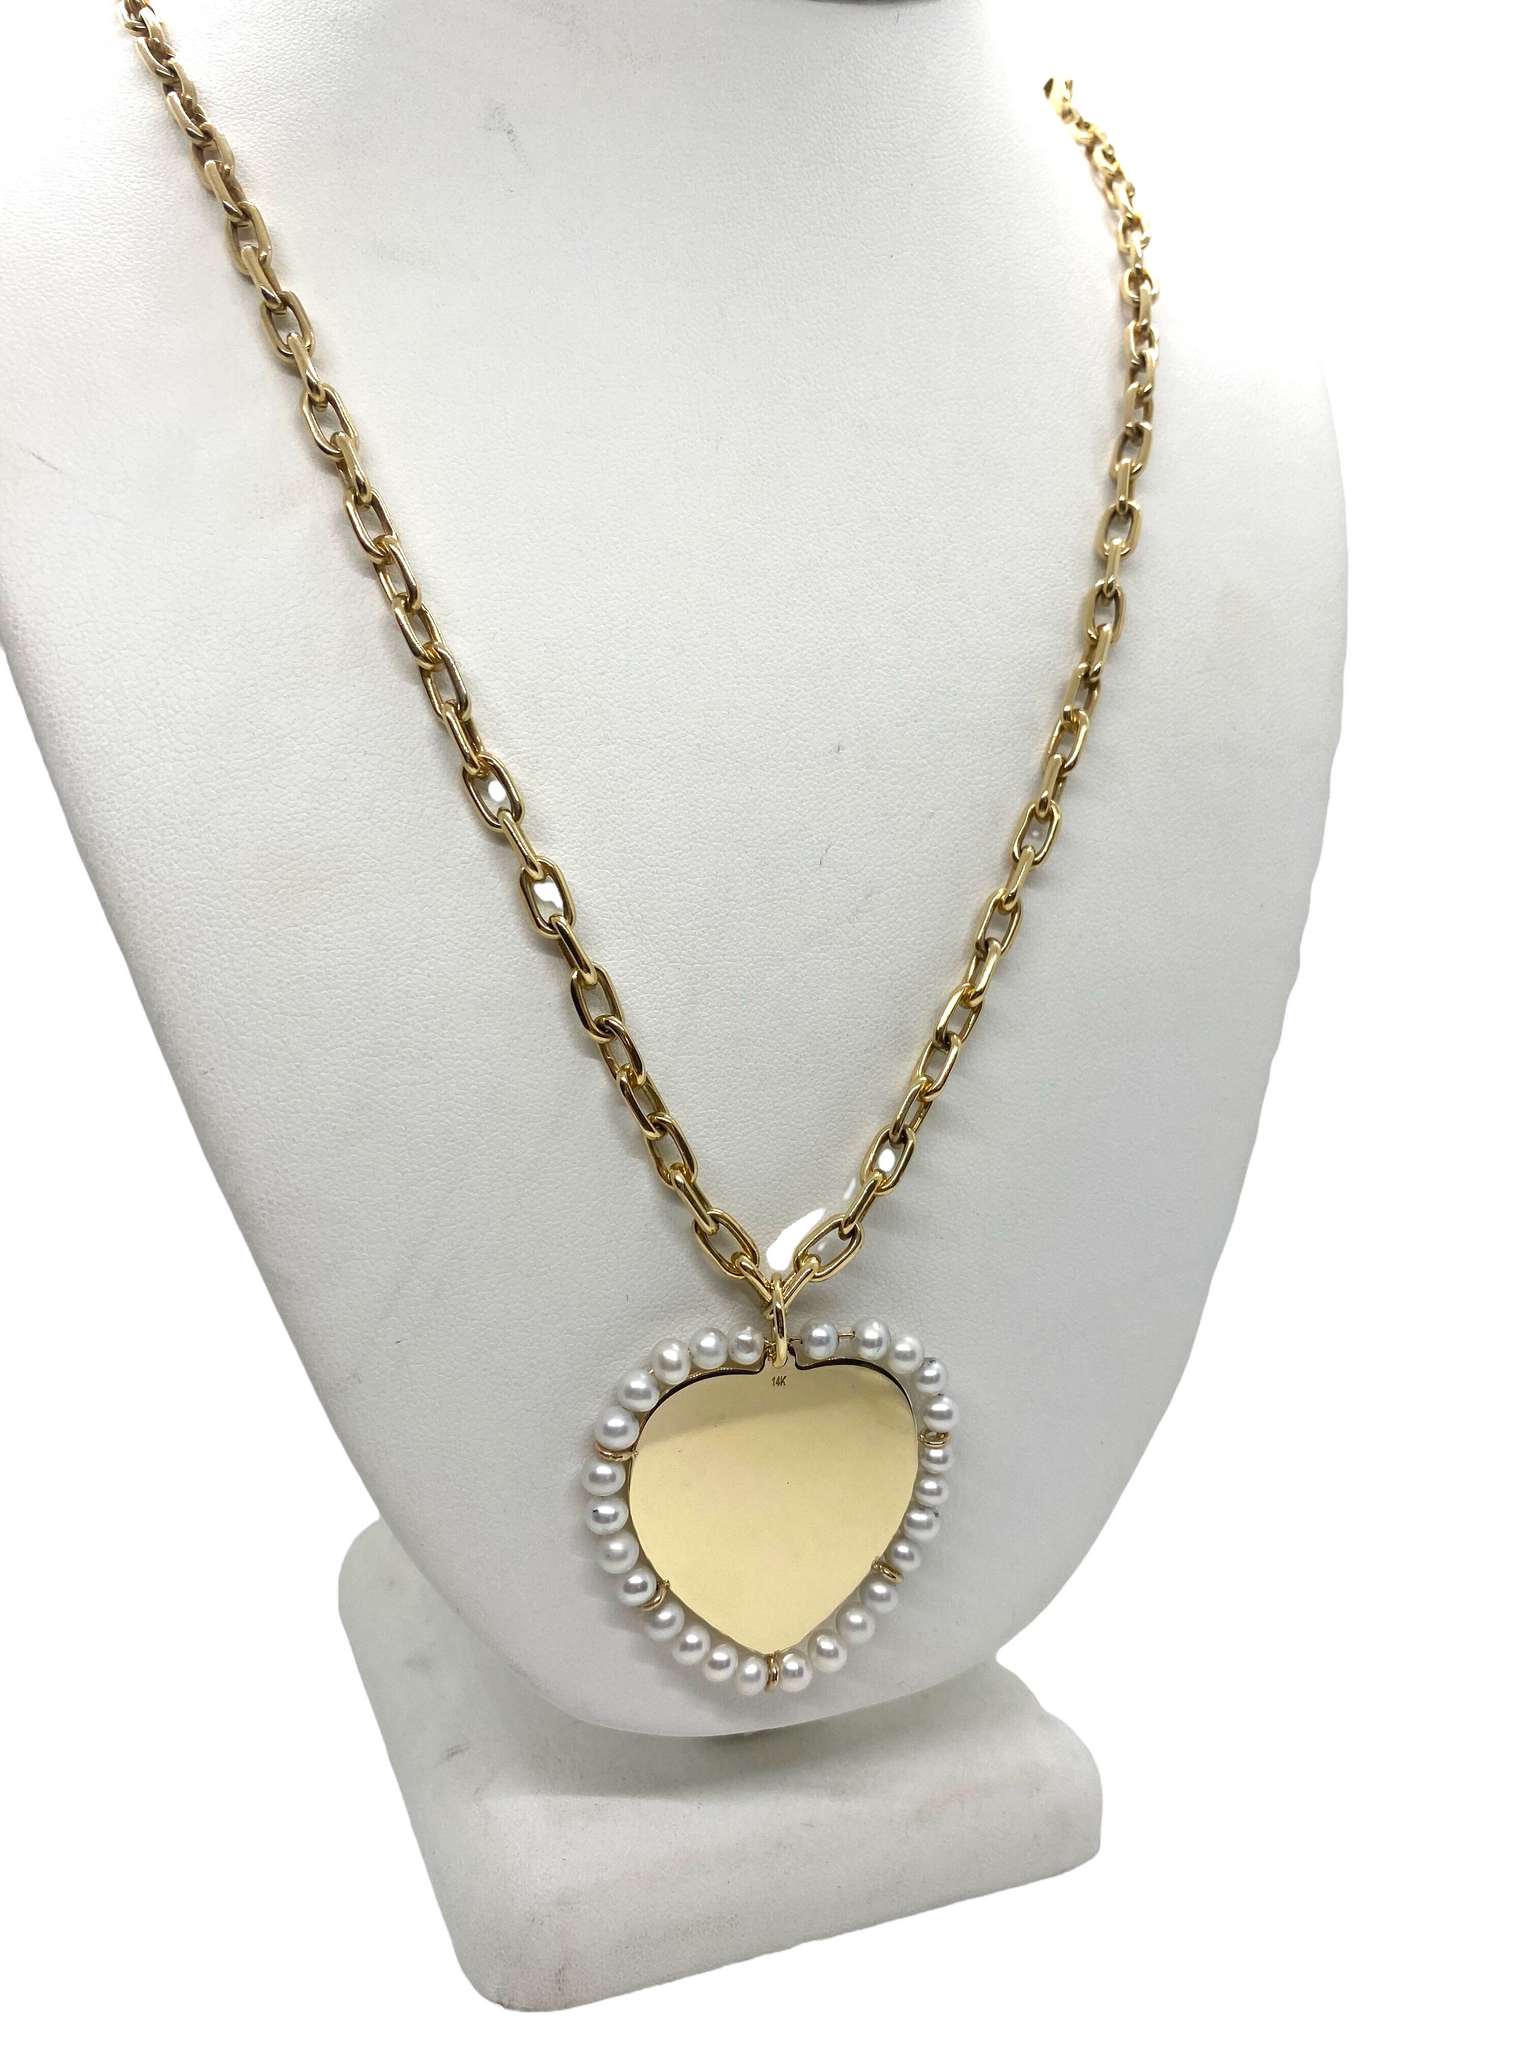 15x15mm Mother-of-Pearl and Diamond-Accented Heart Lock and Key Necklace in  18kt Gold Over Sterling. 20